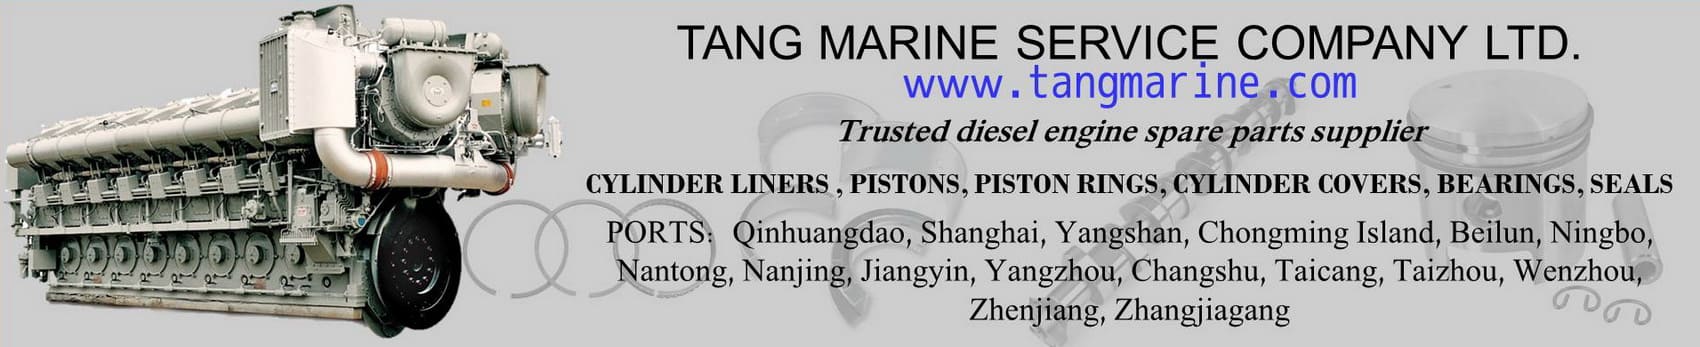 Tang Marine diesel engines spare parts supplier